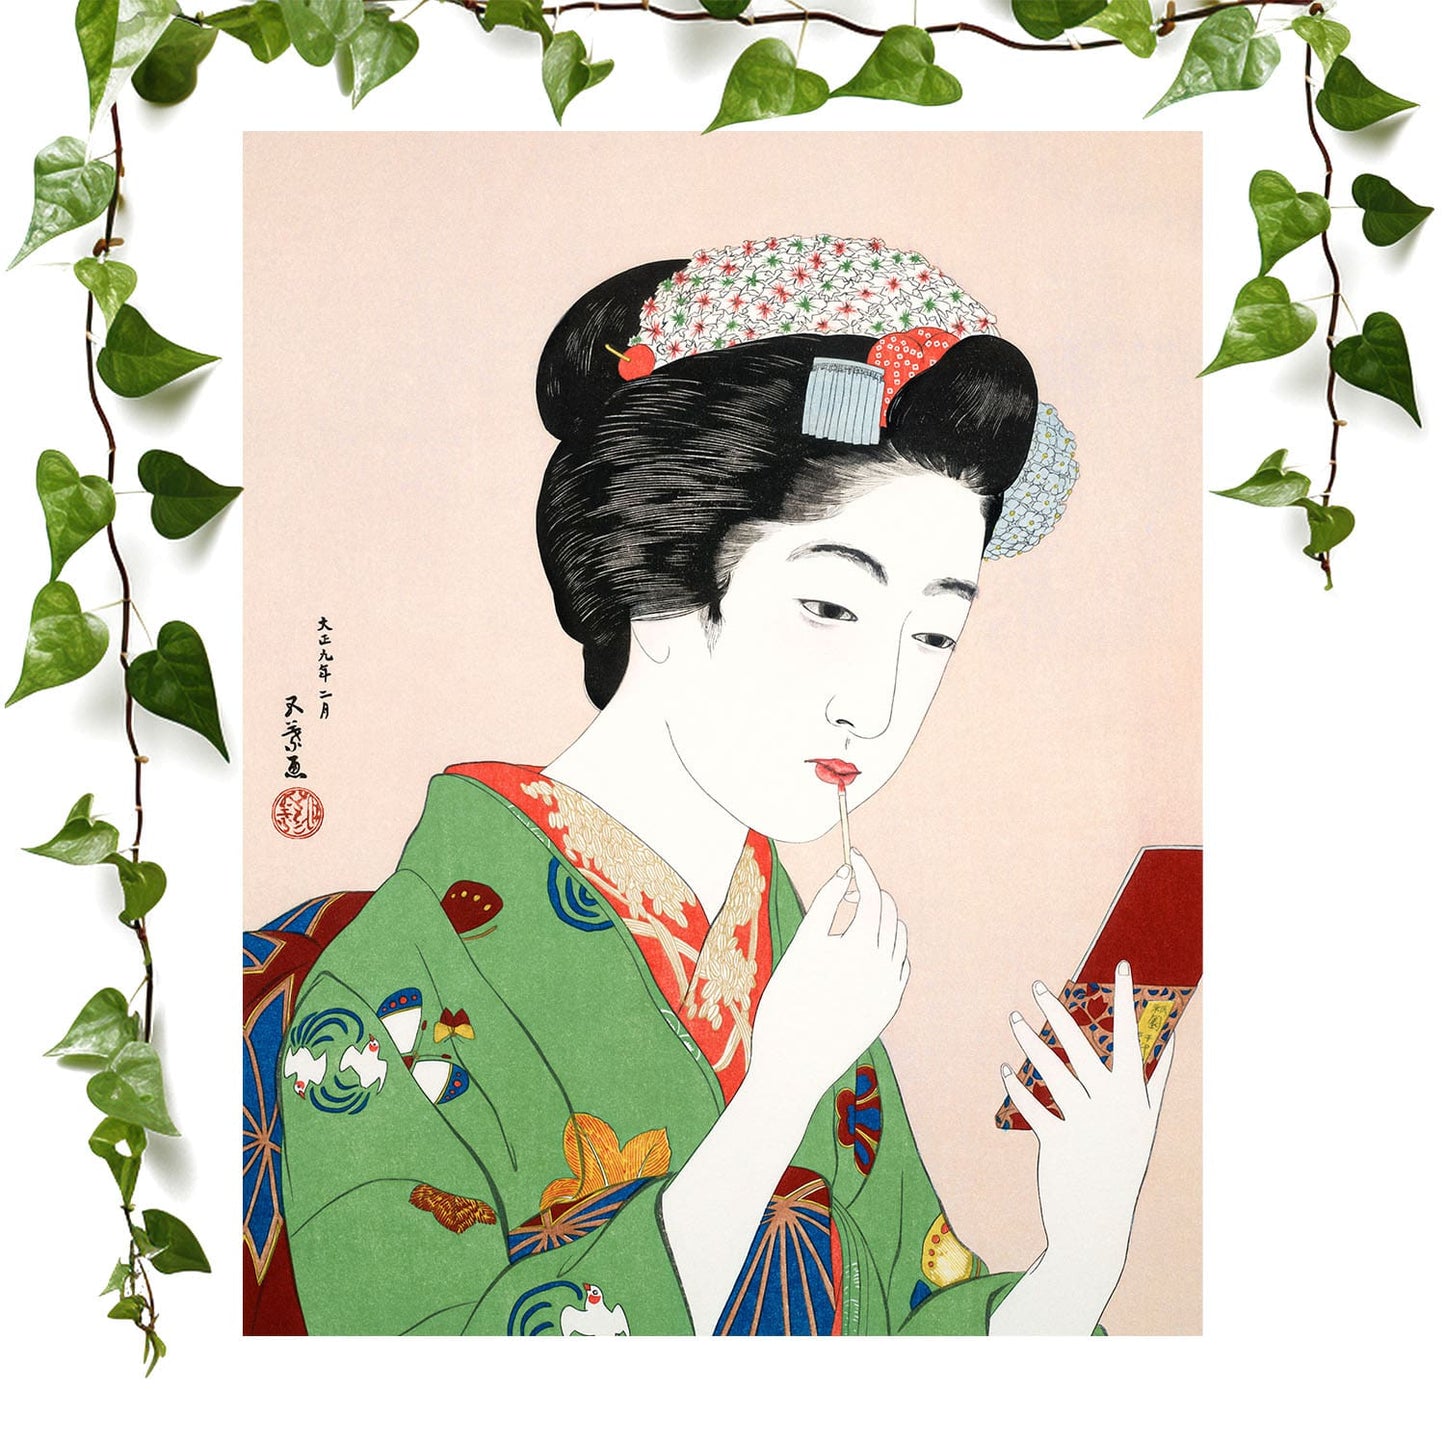 Traditional Japanese art prints featuring a woman applying lipsick, vintage wall art room decor